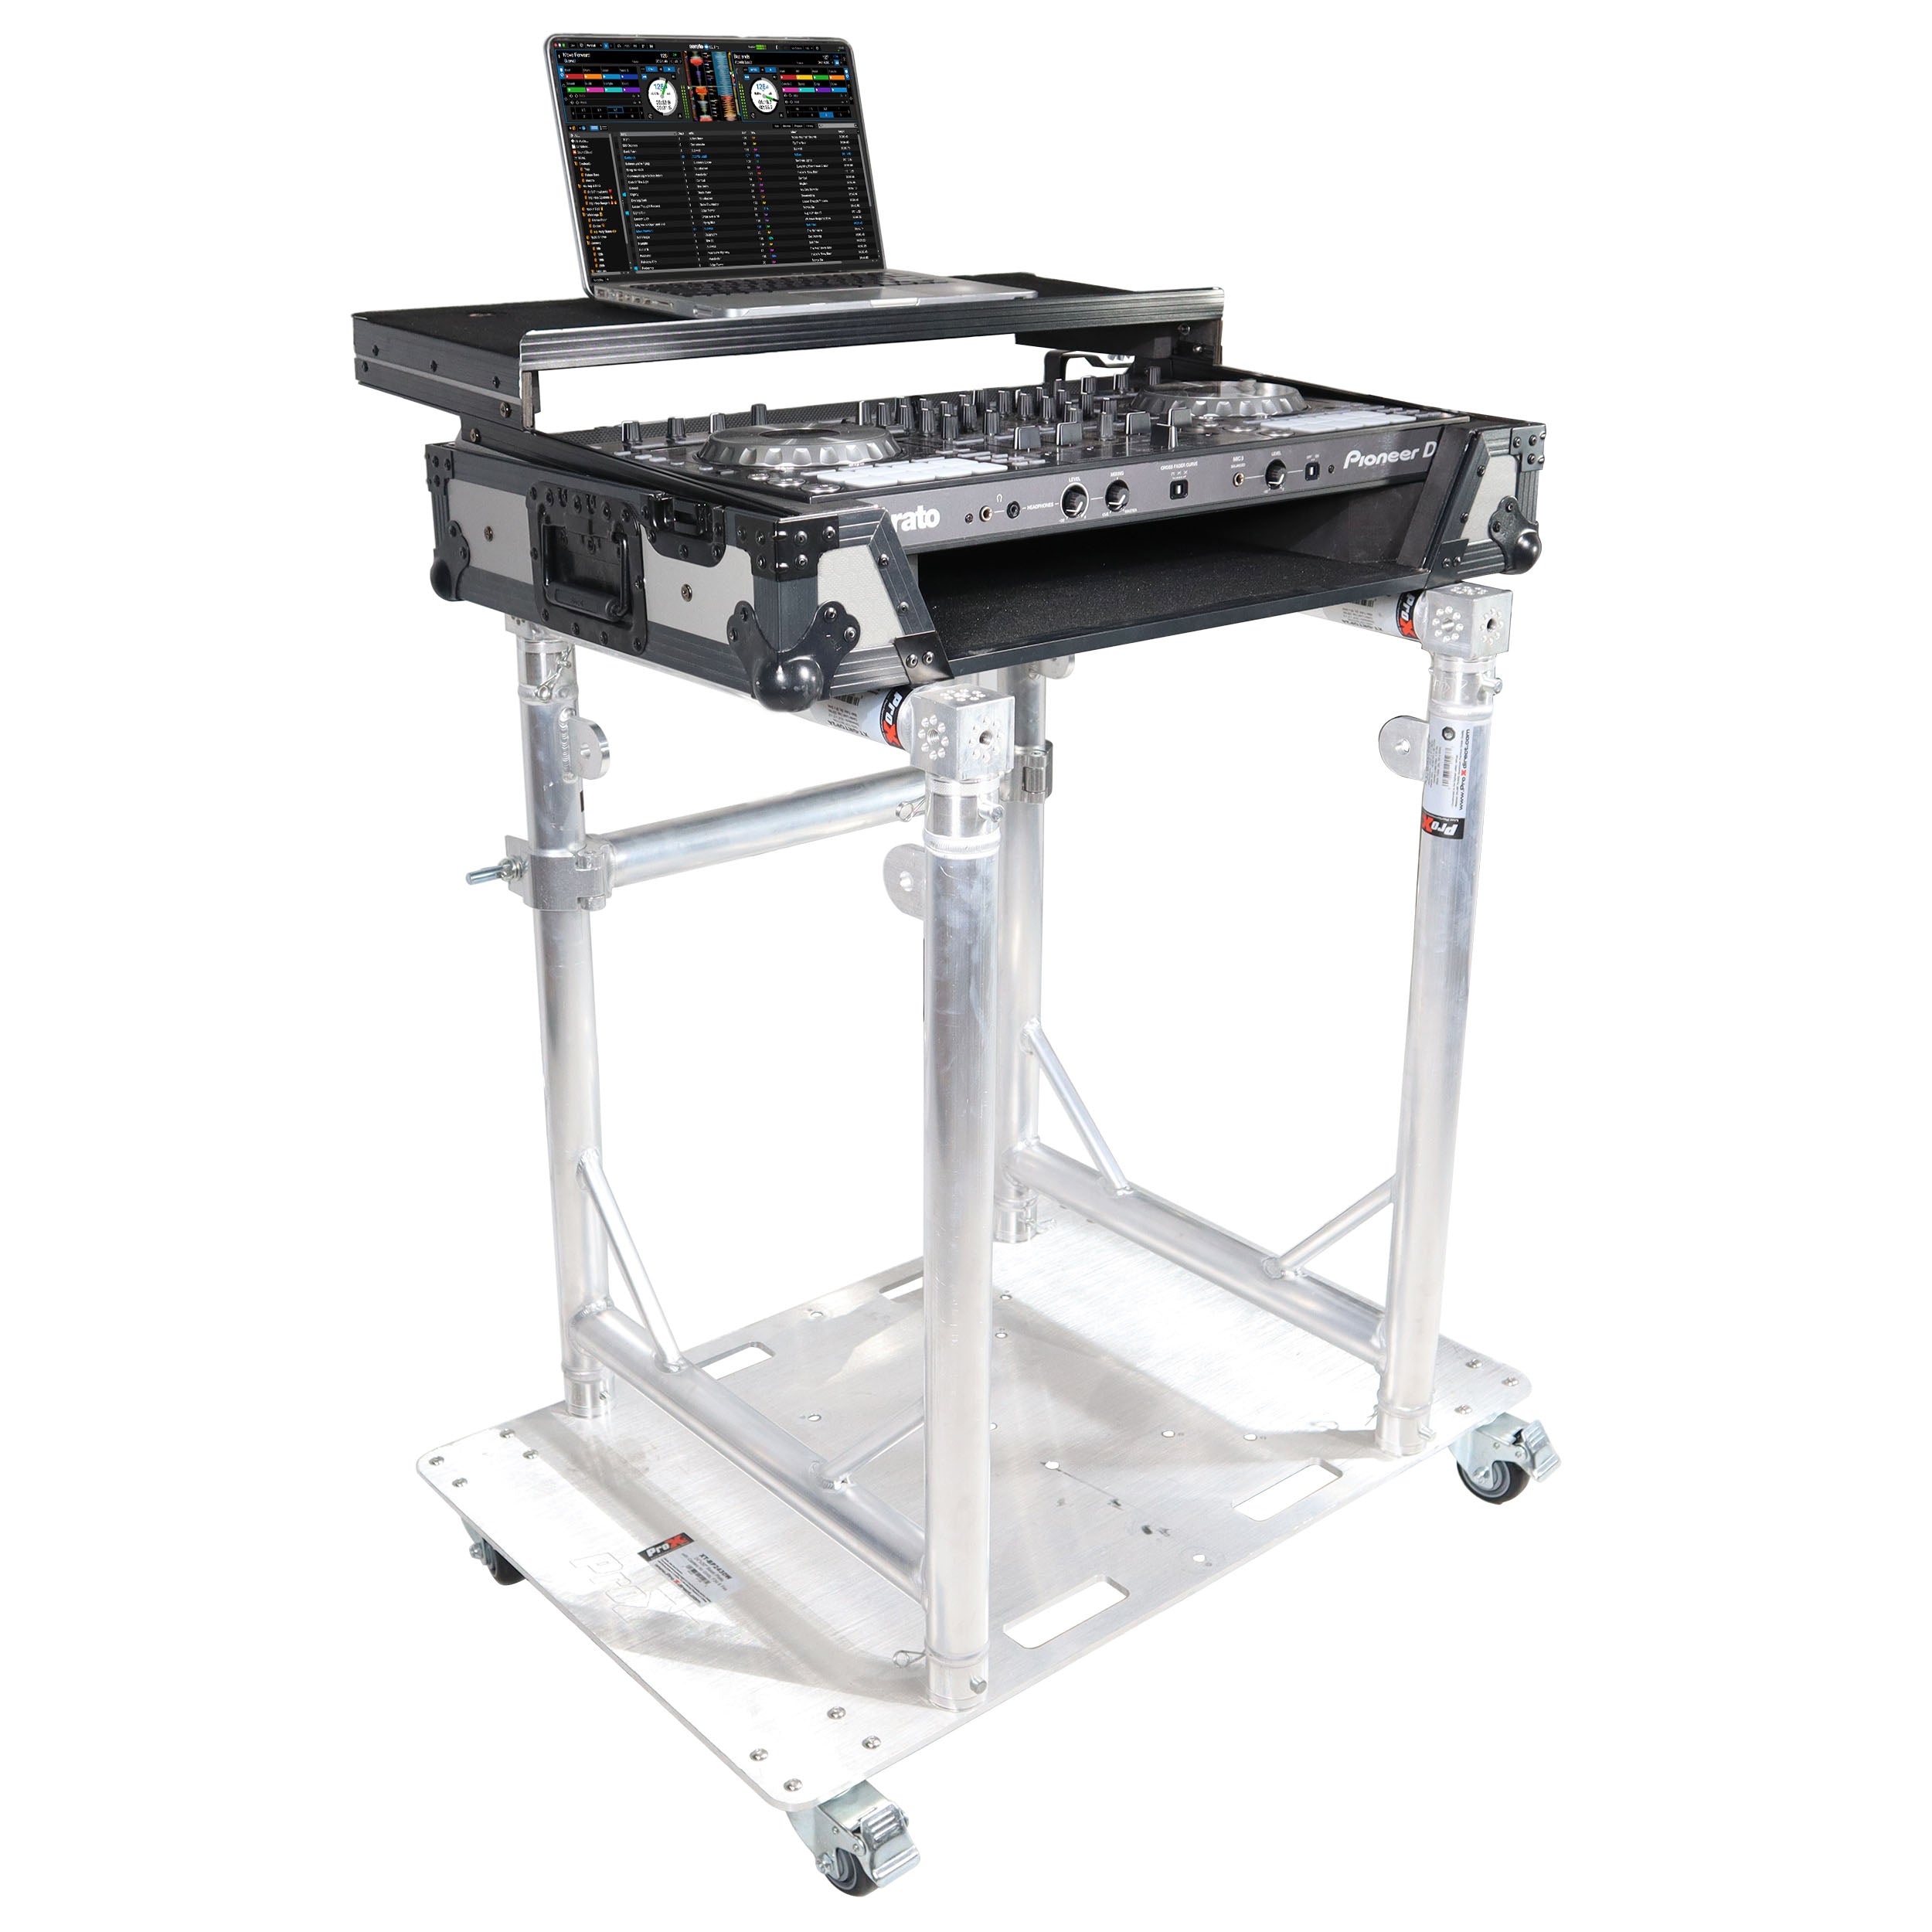 Pro X Modular Mobile Media TV DJ Station Booth for ProX XT-GRU Rapid Grid Modular System and base plate with wheels XT-MMDJTV01